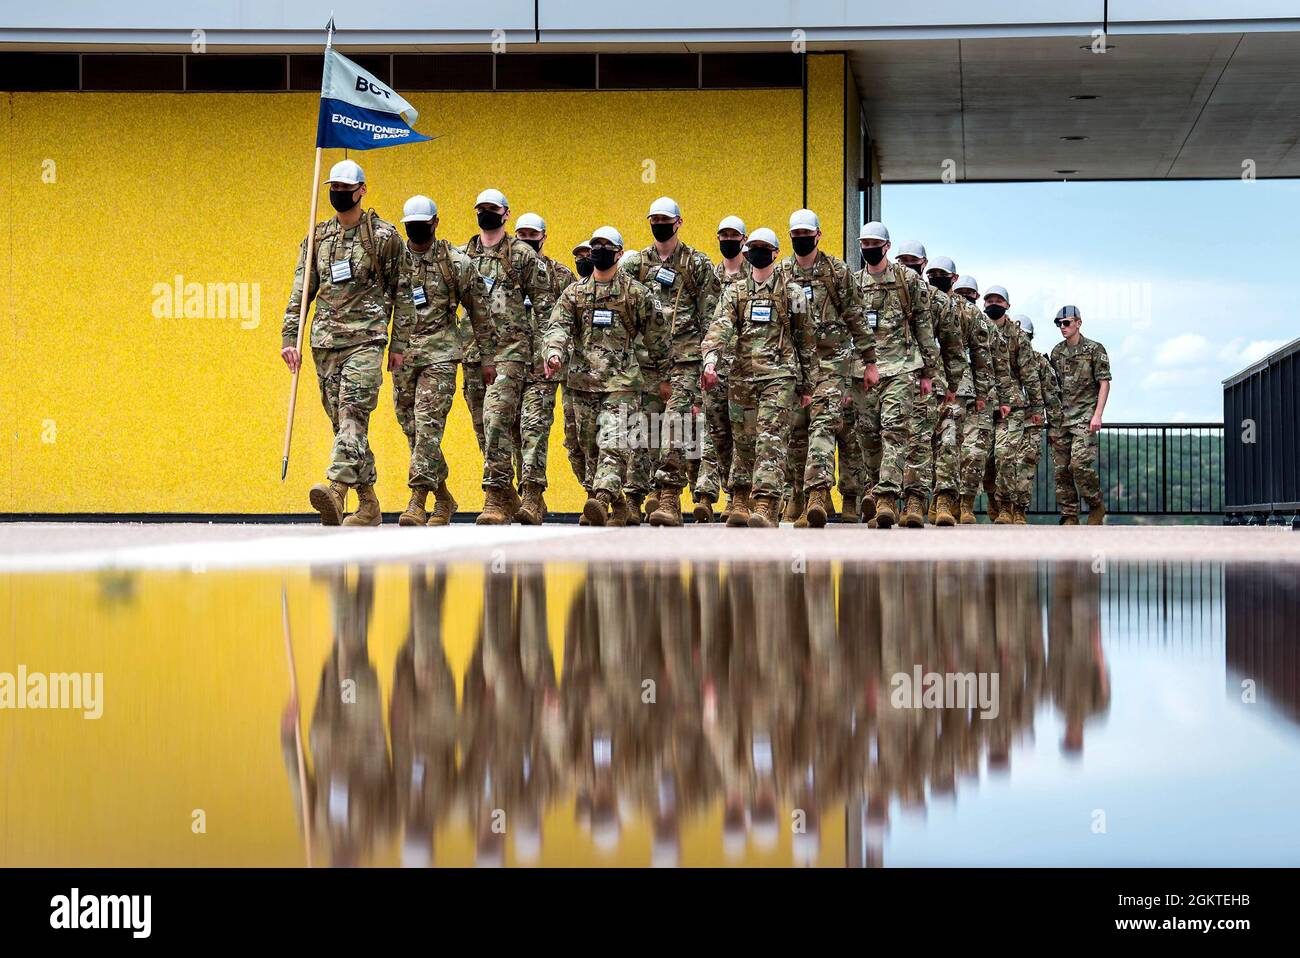 U.S. AIR FORCE ACADEMY, Colo. – Academy basic cadets participate in the first phase of basic cadet training with marching drills on the Terrazzo on June 29, 2021, at the U.S. Air Force Academy in Colorado Springs, Colo. Stock Photo